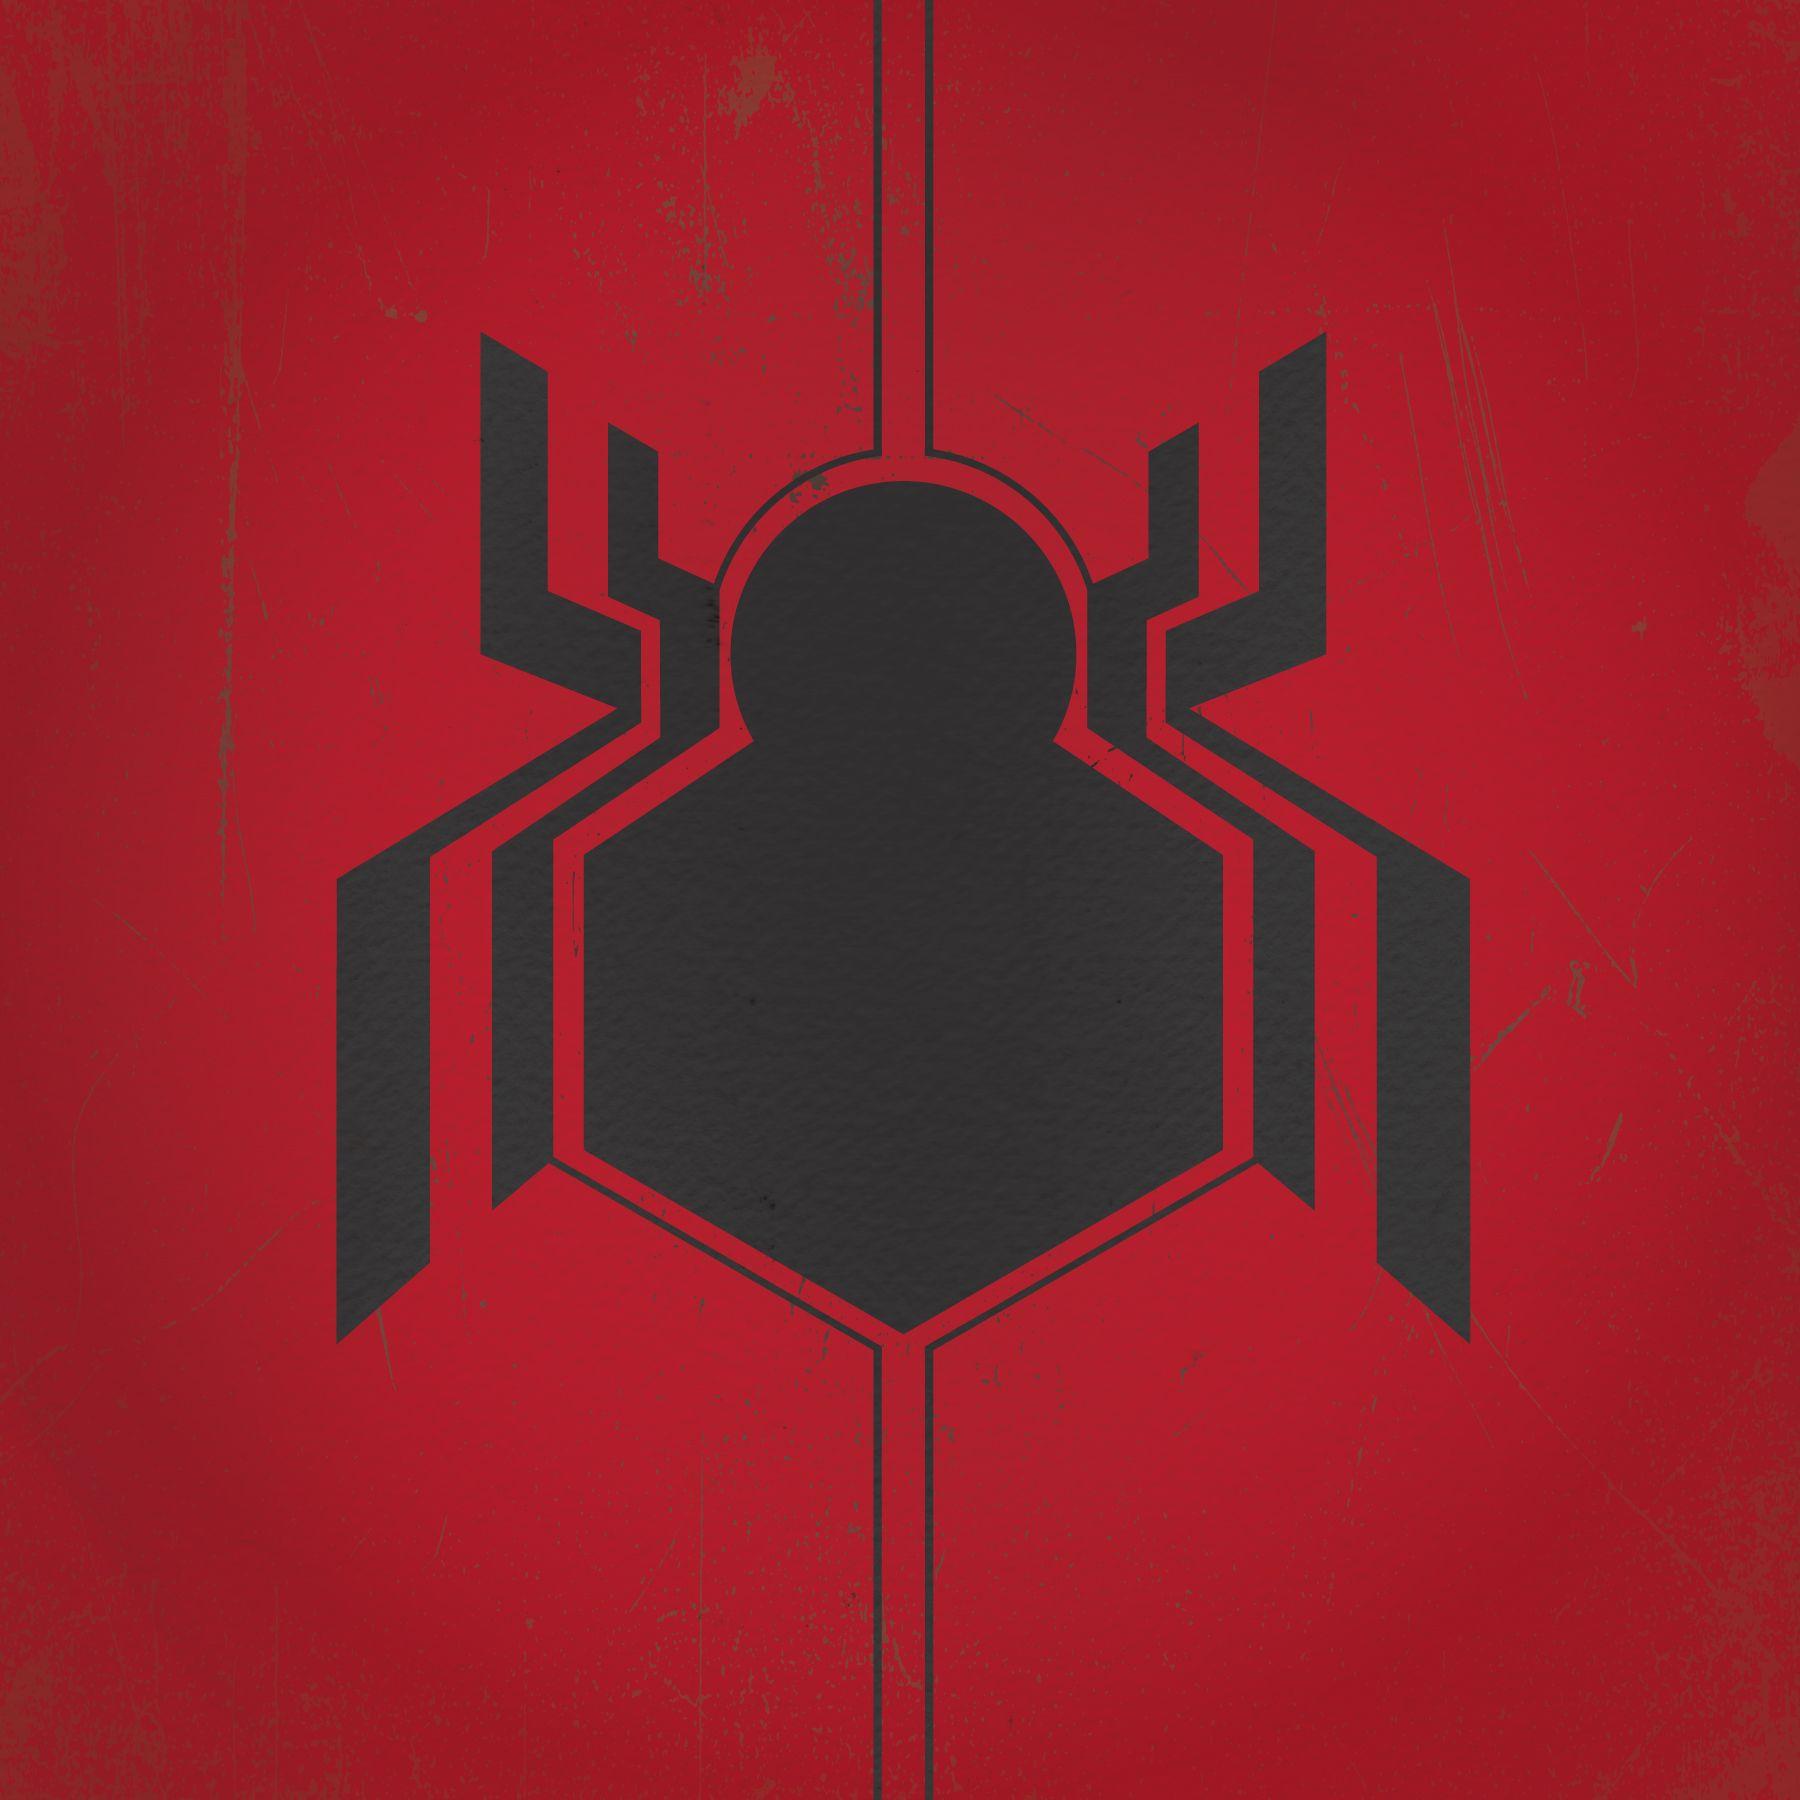 New Spider -Man Logo - I went about recreating the new Spider-Man logo from Civil War ...